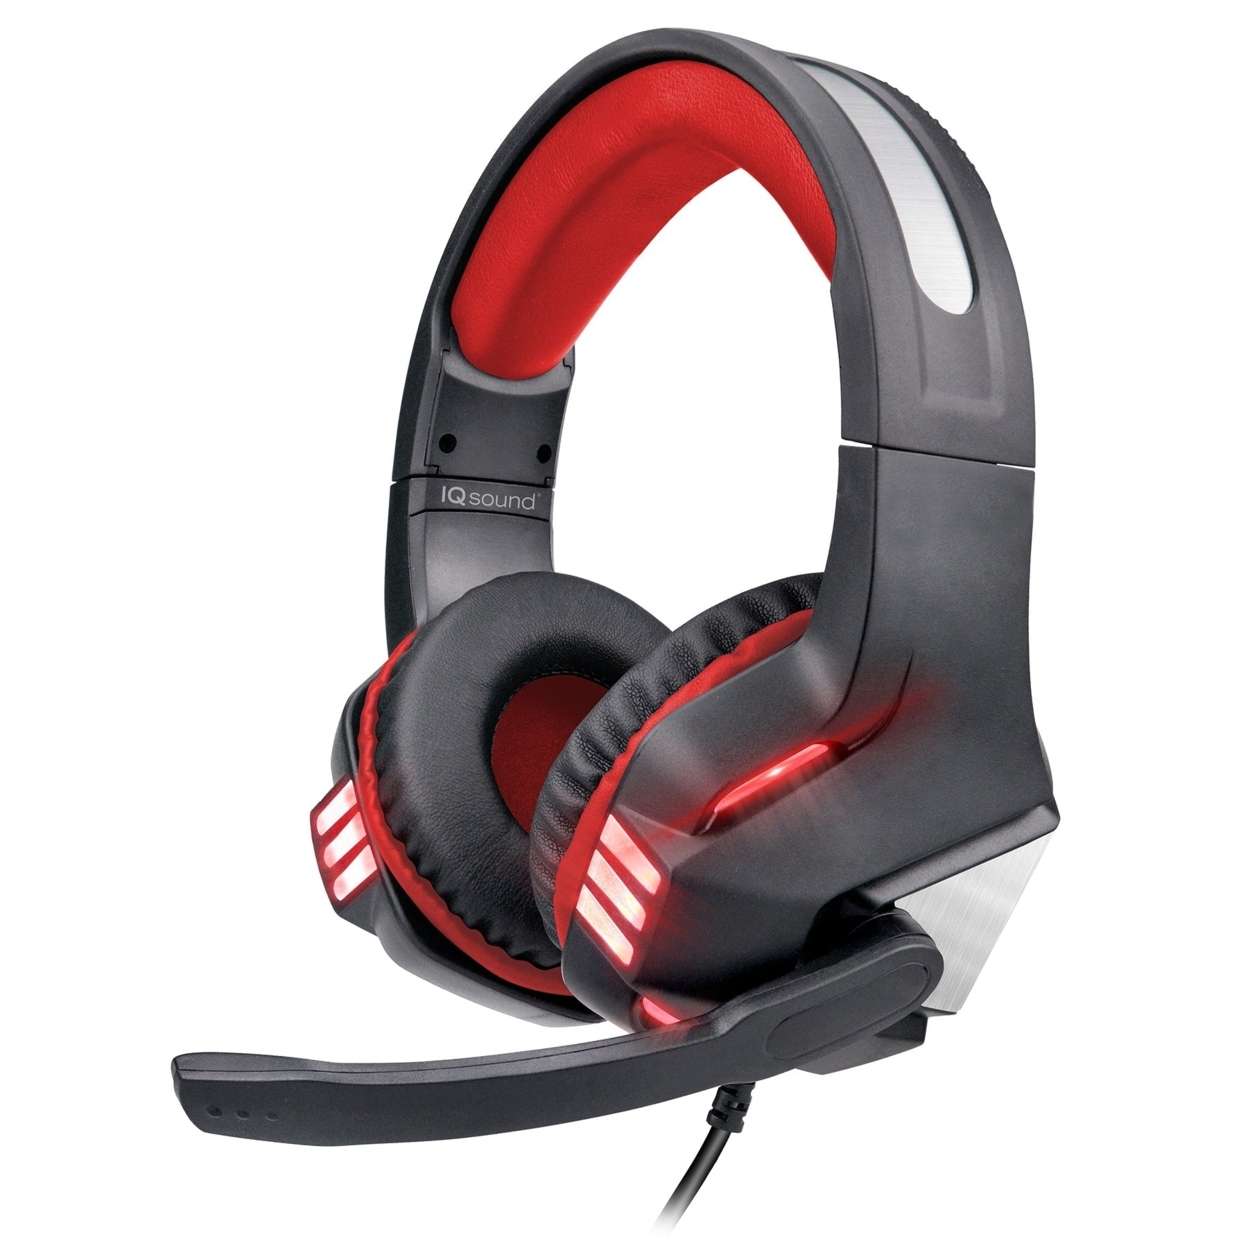 Pro-Wired Gaming Headset With Great Stereo Surround Sound Effect (IQ-480G) - Red